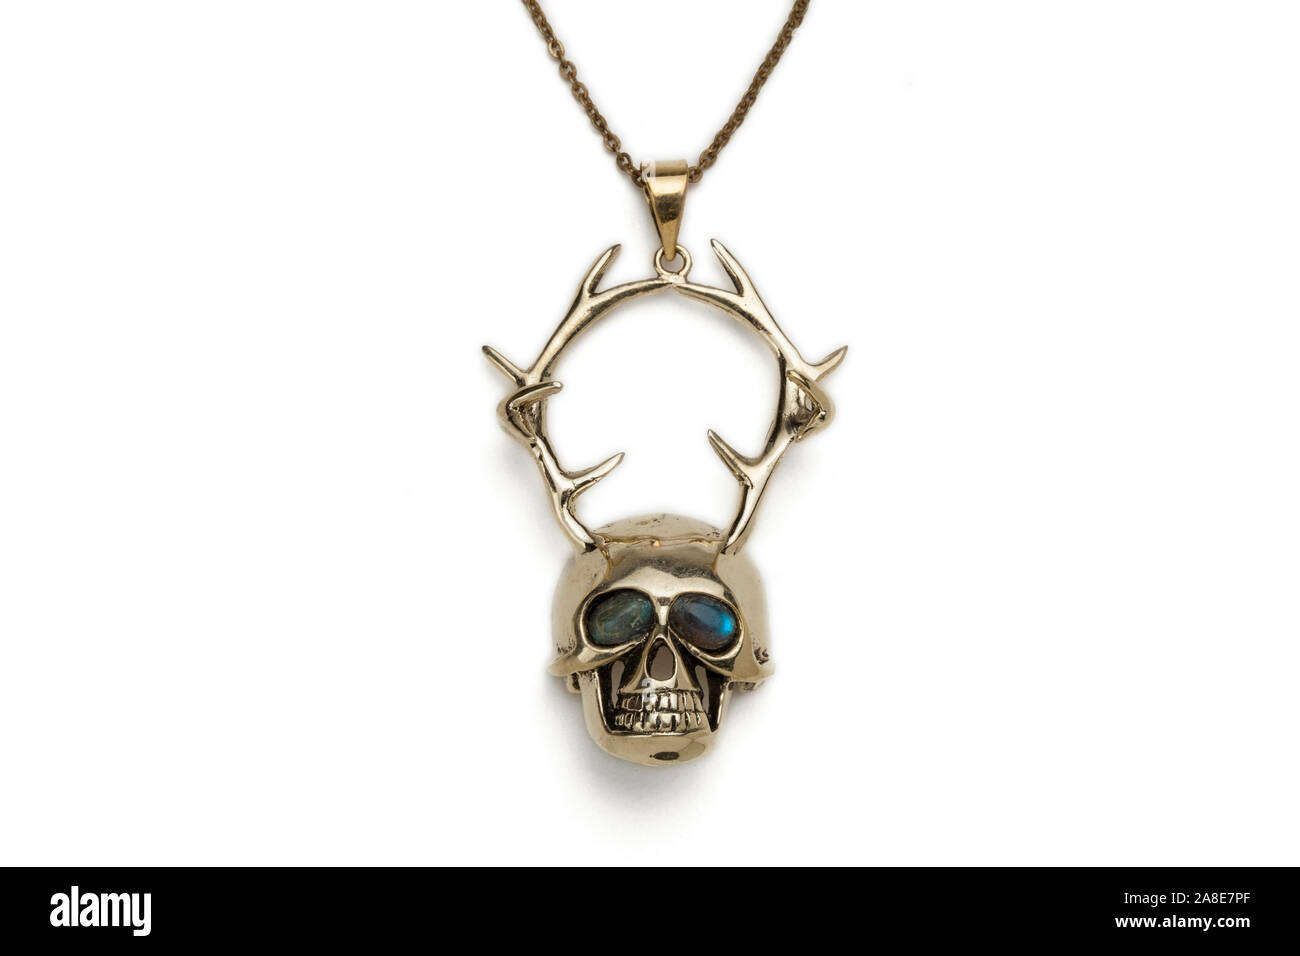 Silver human skull and stag antlers necklace pendant. Stock Photo